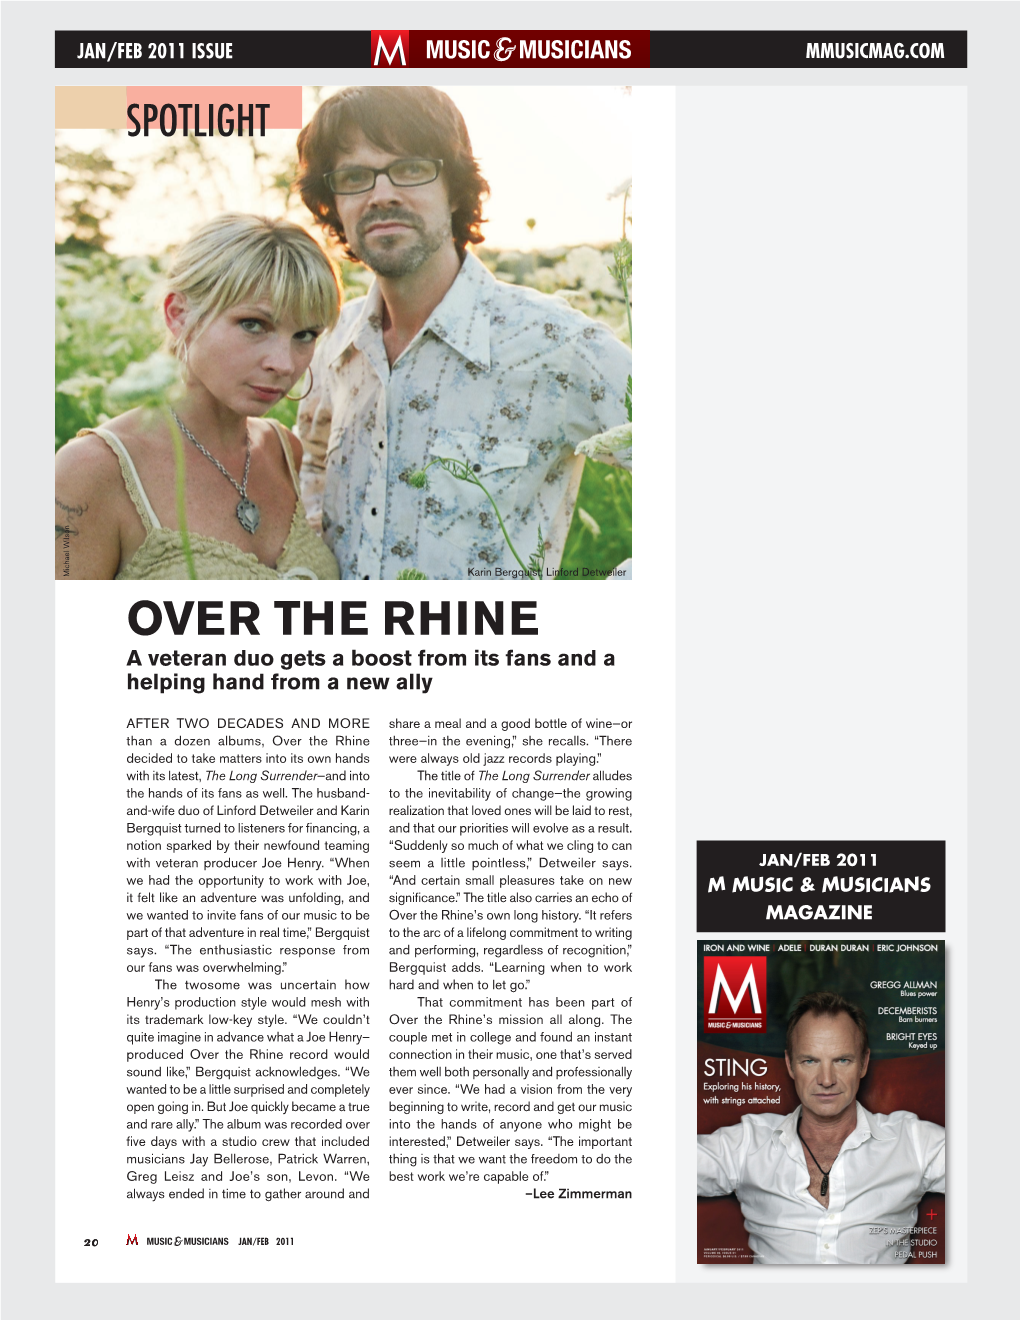 Over the Rhine a Veteran Duo Gets a Boost from Its Fans and a Helping Hand from a New Ally